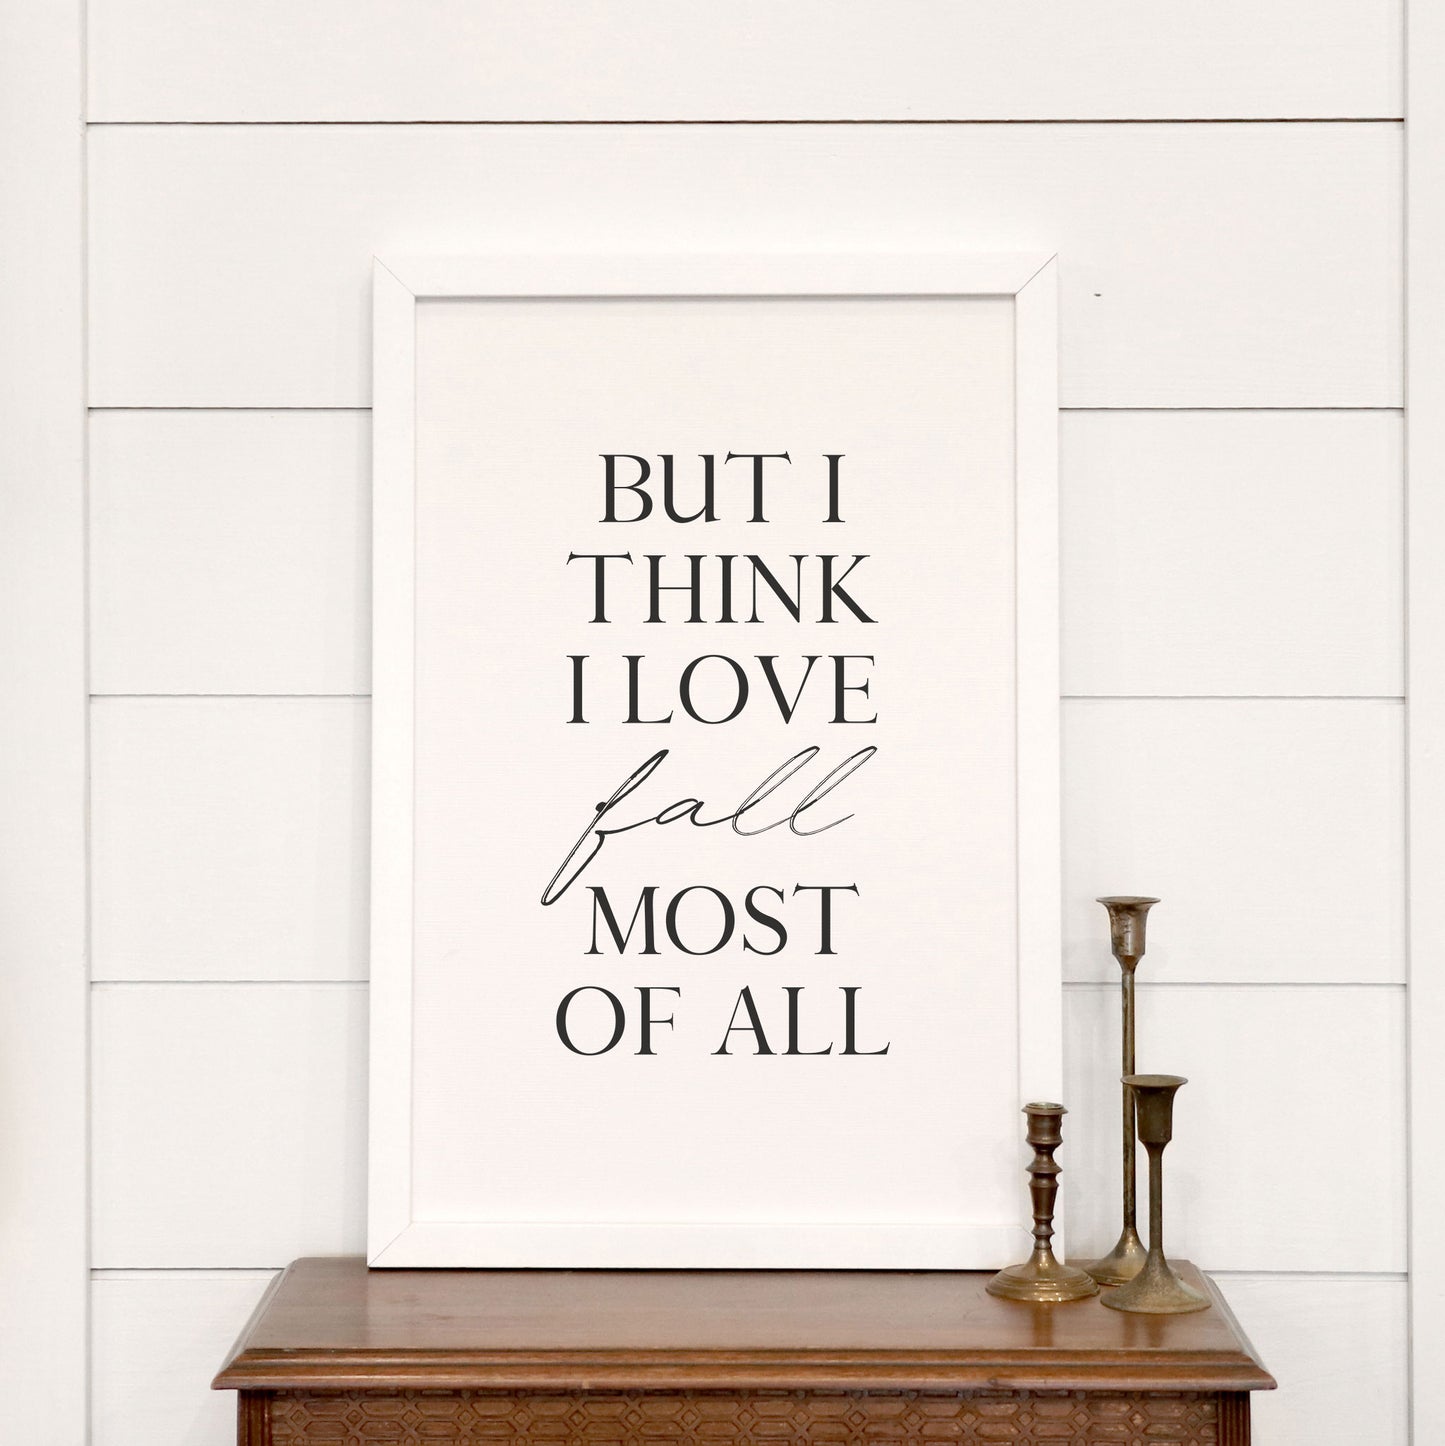 Smallwoods "I Love Fall Most of All" Sign Reading "But I Think I Love Fall Most of All" with Wooden Frame